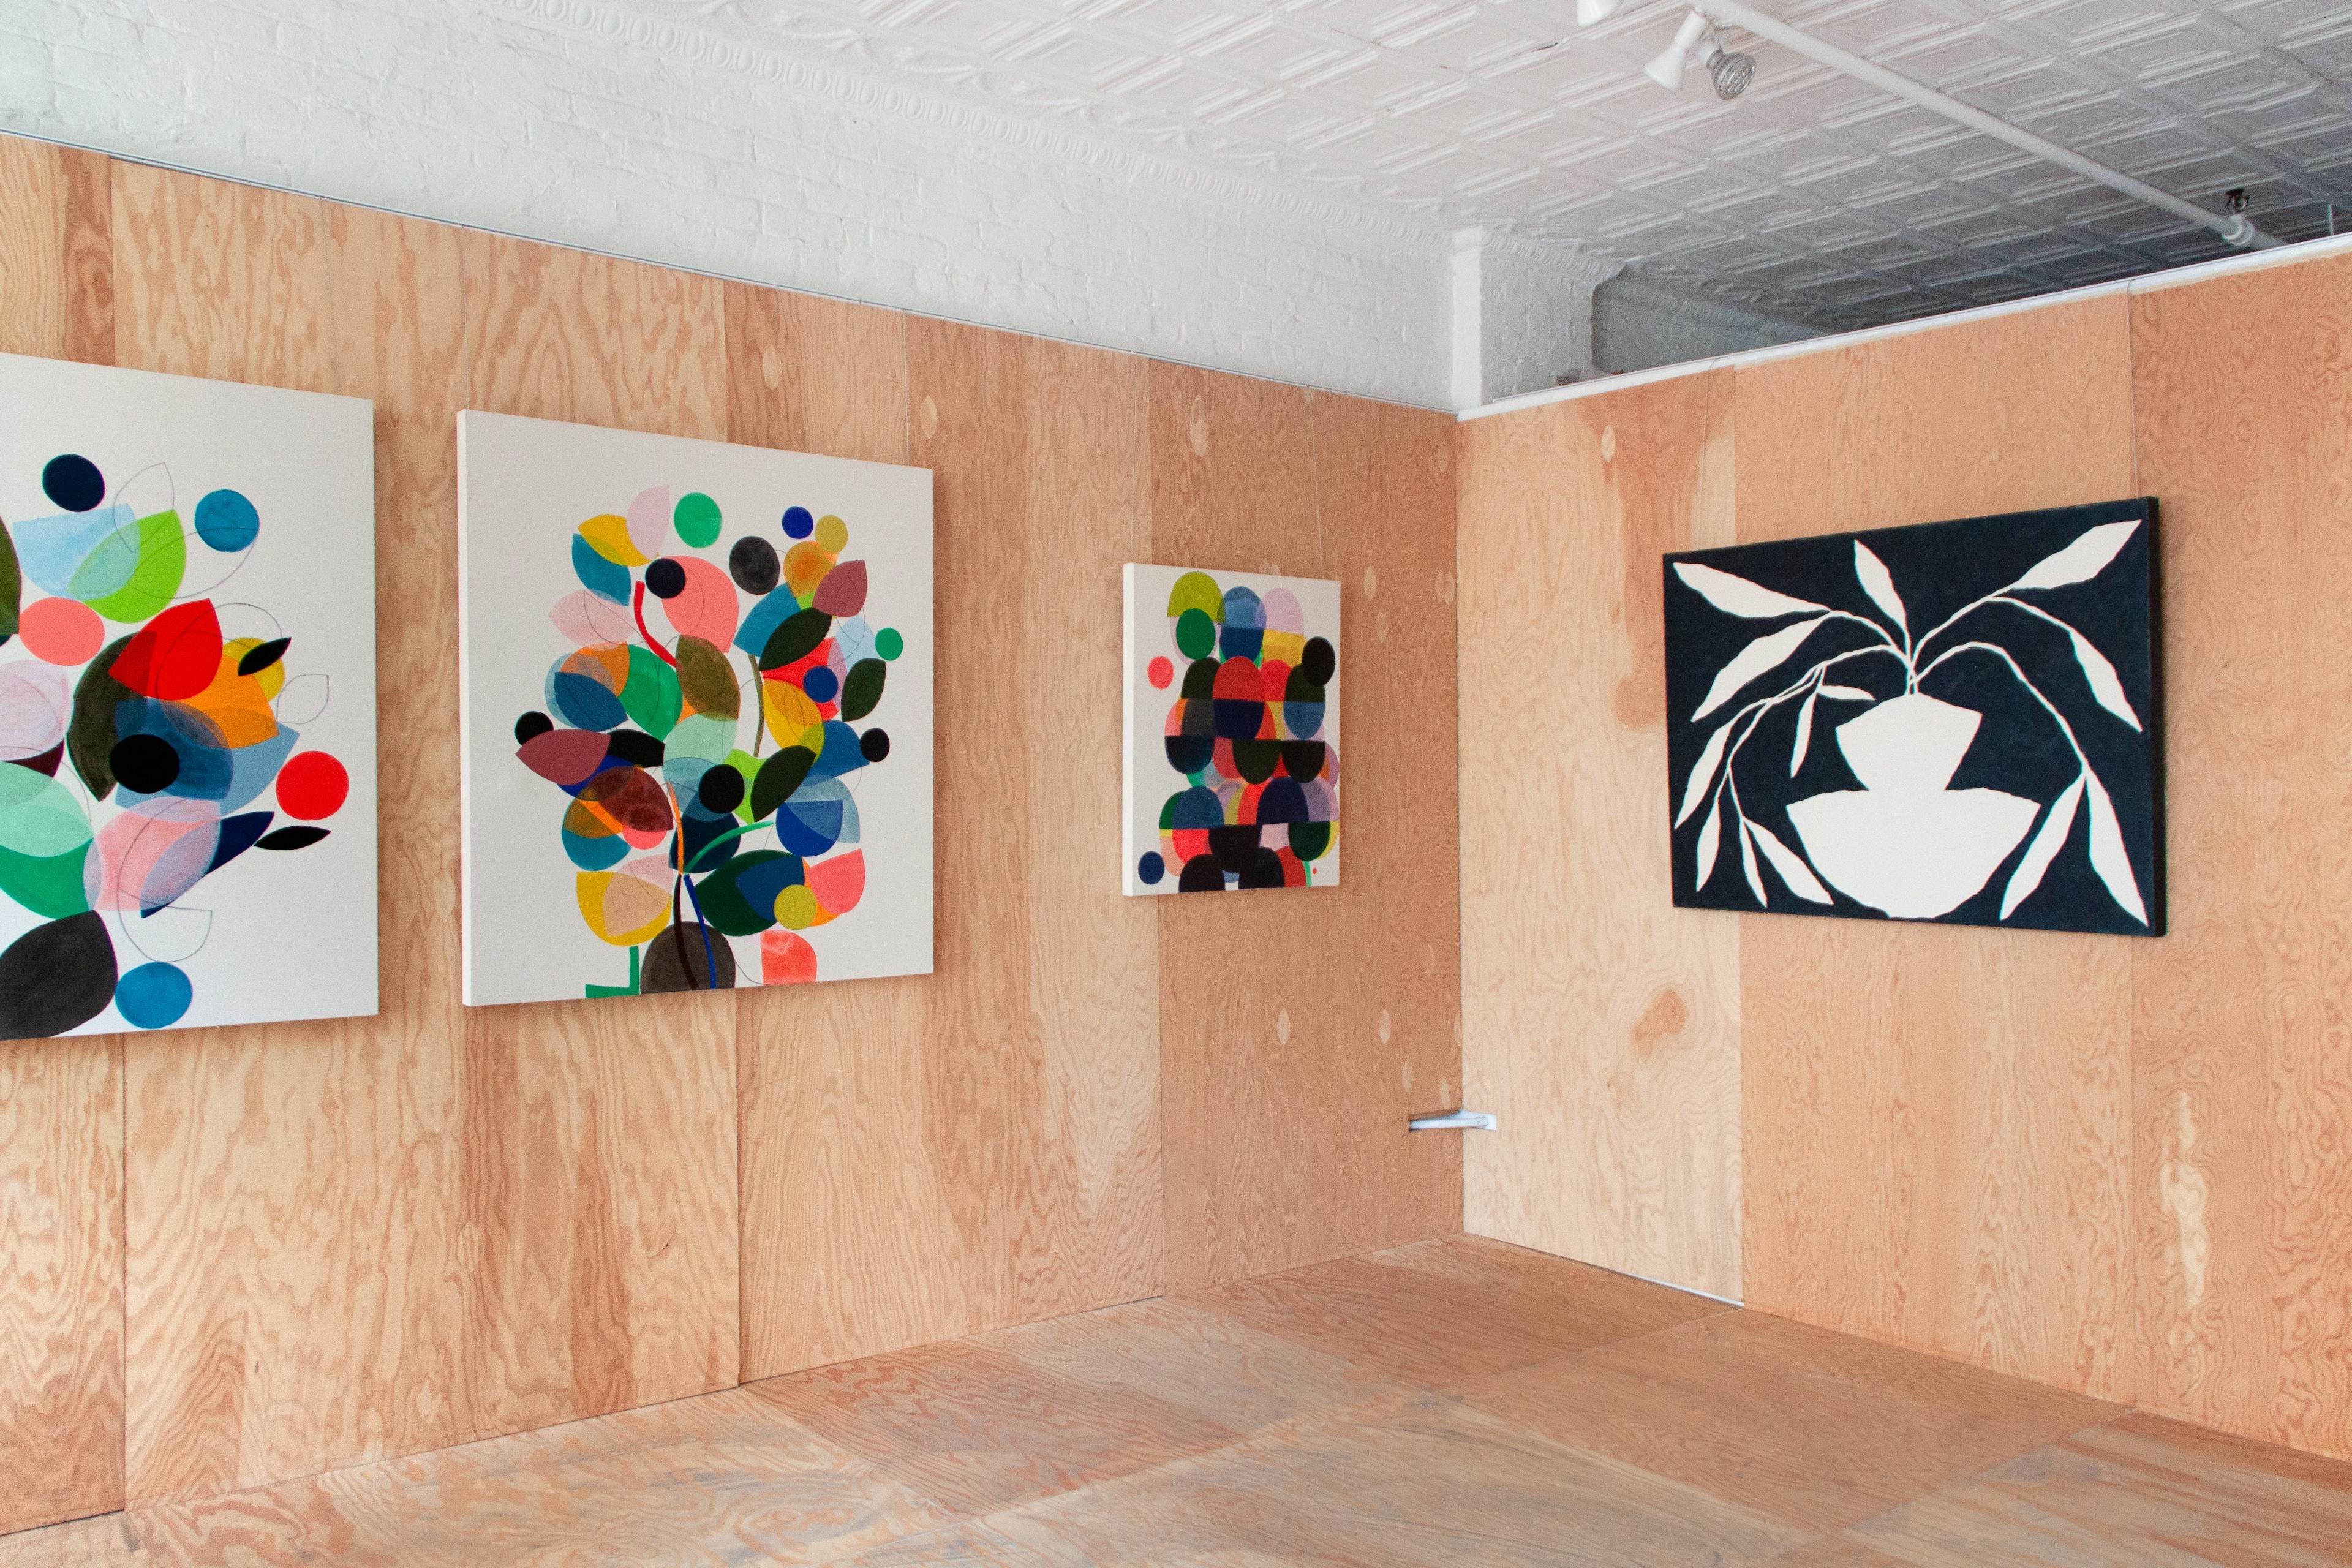 Artwork installed as part of Epode, one of Uprise Art's Exhibitions in New York, NY.